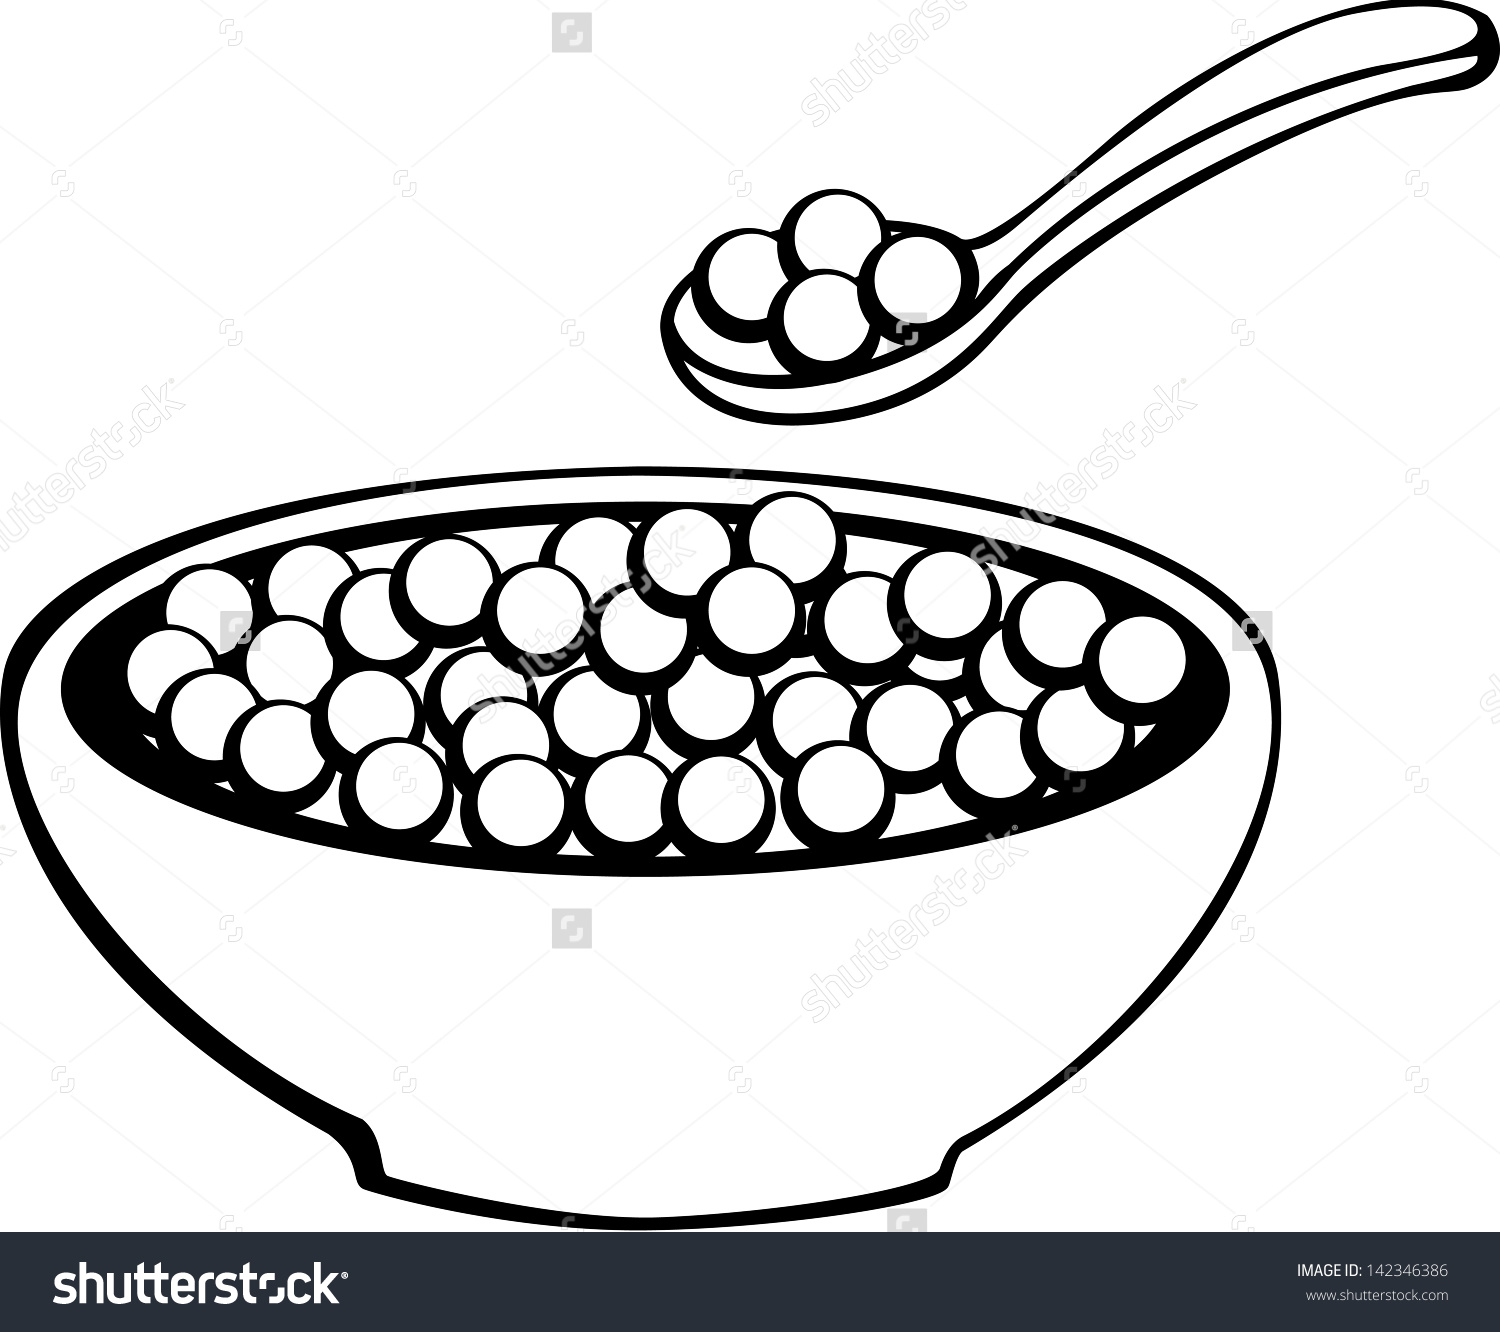 Bowl in and spoon. Cereal clipart ceral